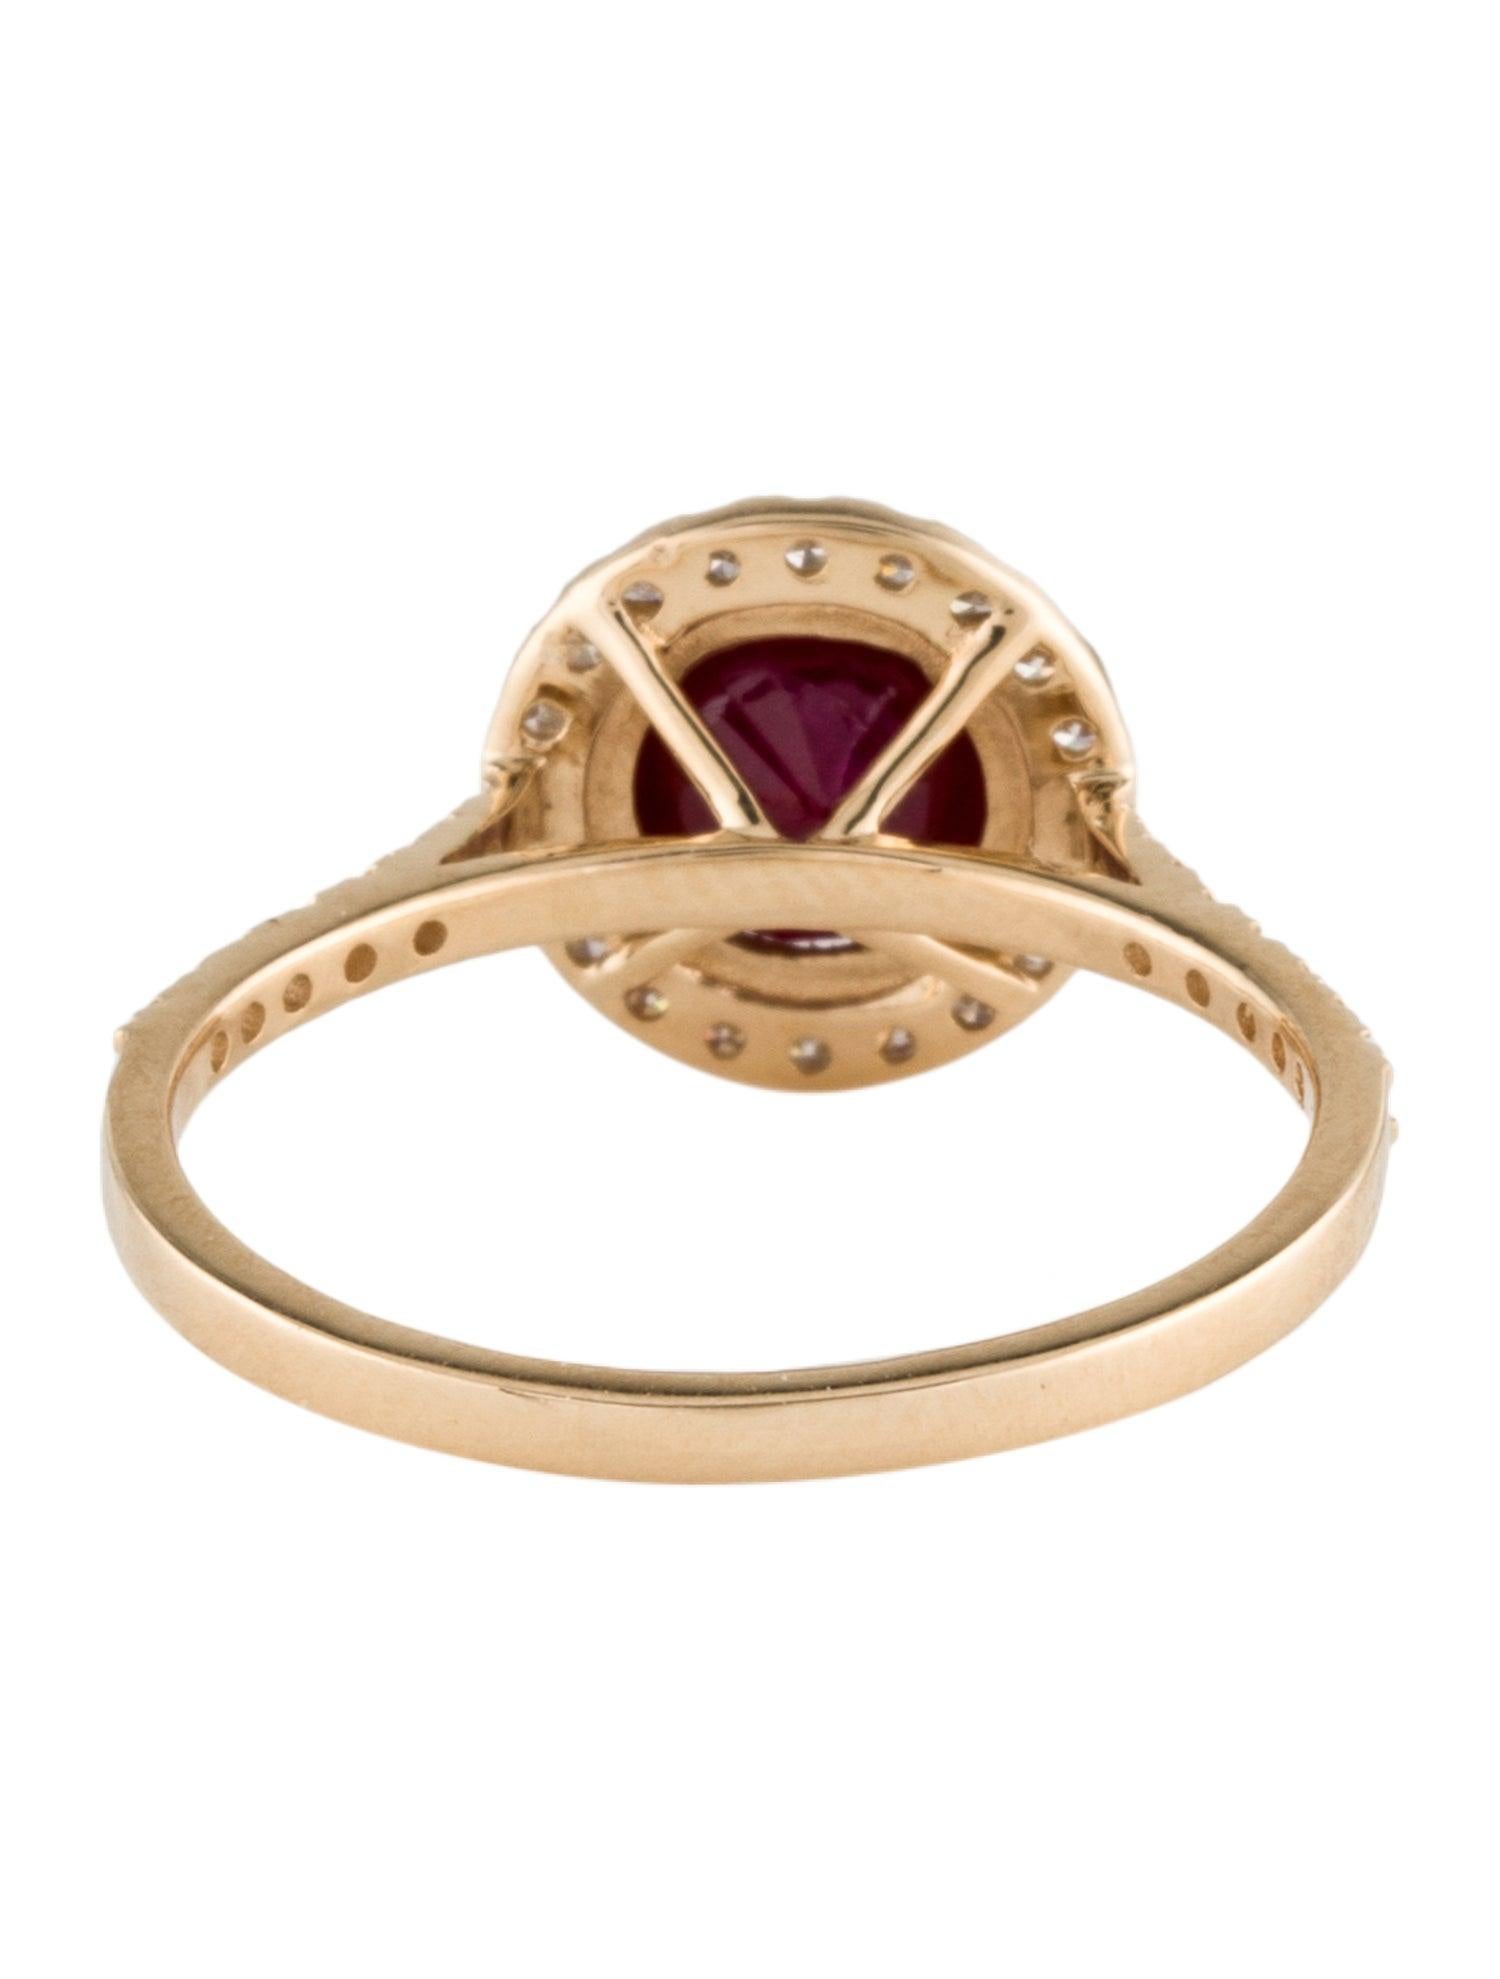 Brilliant Cut Captivating 14K Gold 1.66ct Ruby & Diamond Cocktail Ring - Size 7 - Fine Jewelry For Sale